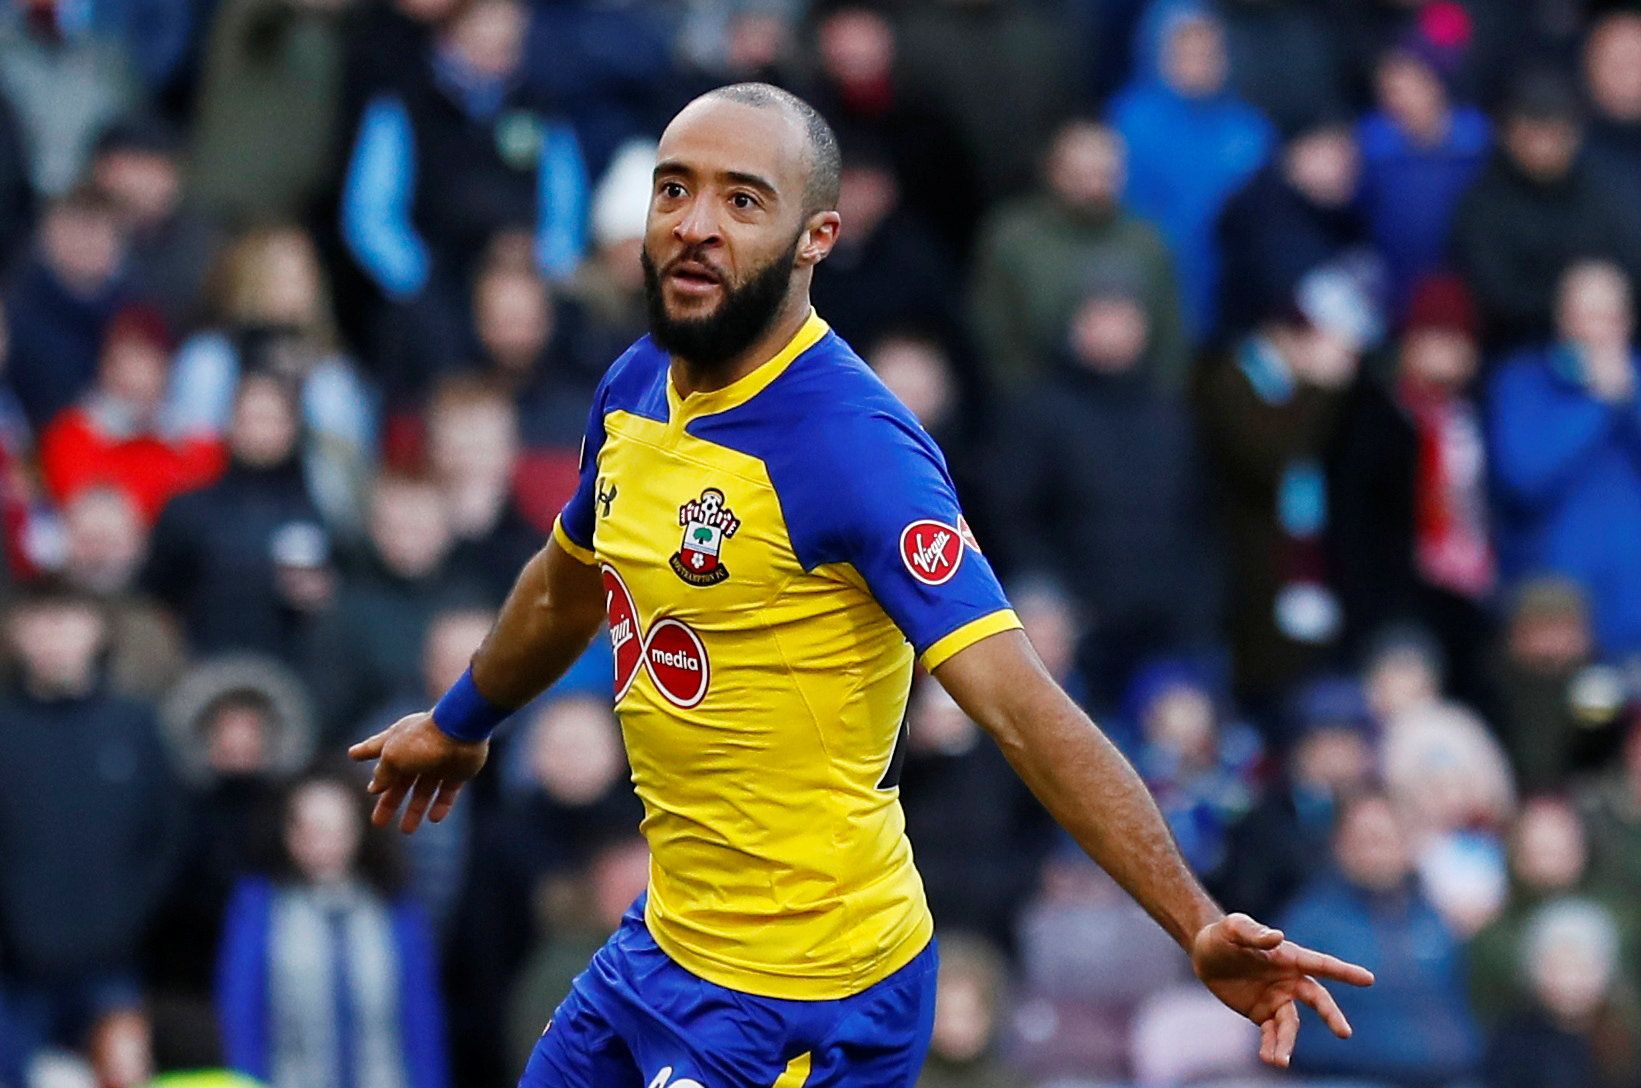 Soccer Football - Premier League - Burnley v Southampton - Turf Moor, Burnley, Britain - February 2, 2019  Southampton's Nathan Redmond celebrates scoring their first goal               Action Images via Reuters/Jason Cairnduff  EDITORIAL USE ONLY. No use with unauthorized audio, video, data, fixture lists, club/league logos or 